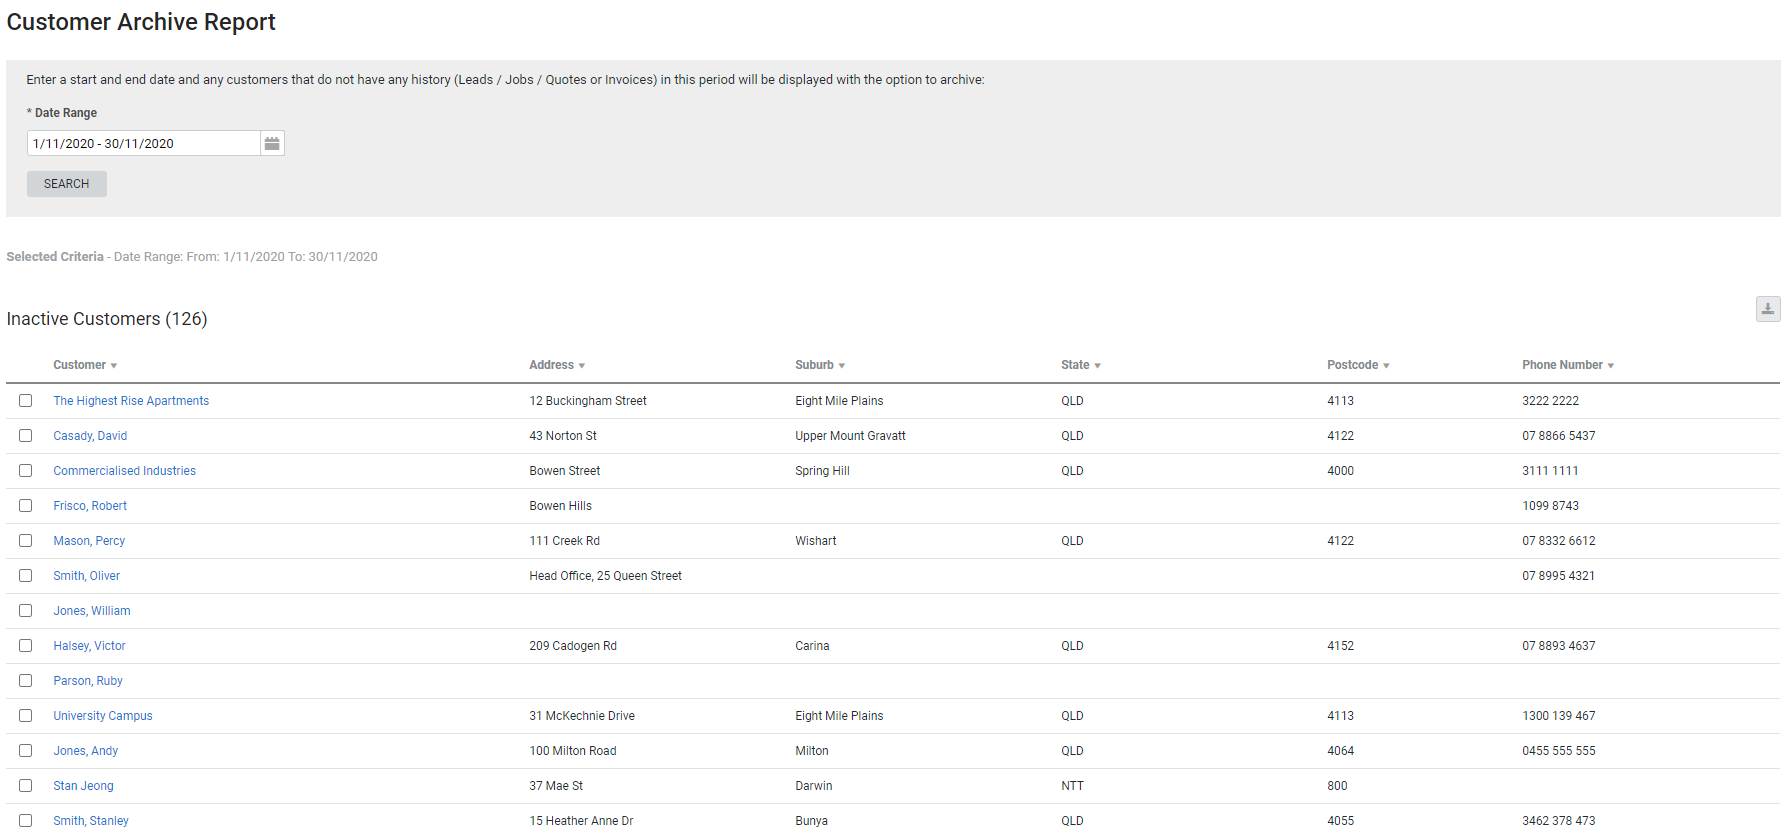 A screenshot of the Customer Archive report.